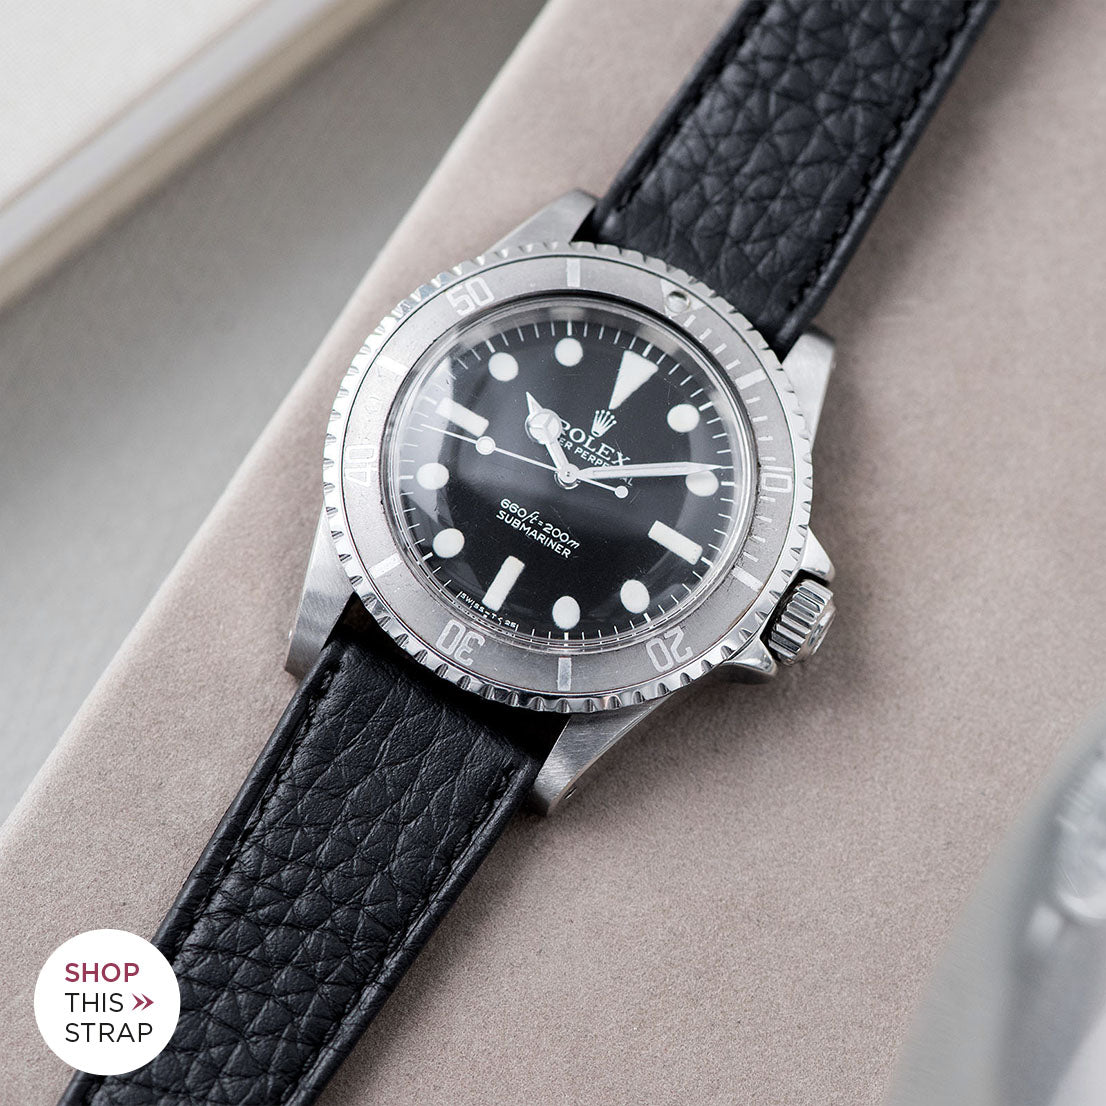 Bulang and Sons_Strap Guide_The Rolex 5513 Faded Maxi Submariner_Taurillon Black Speedy Leather Watch Strap